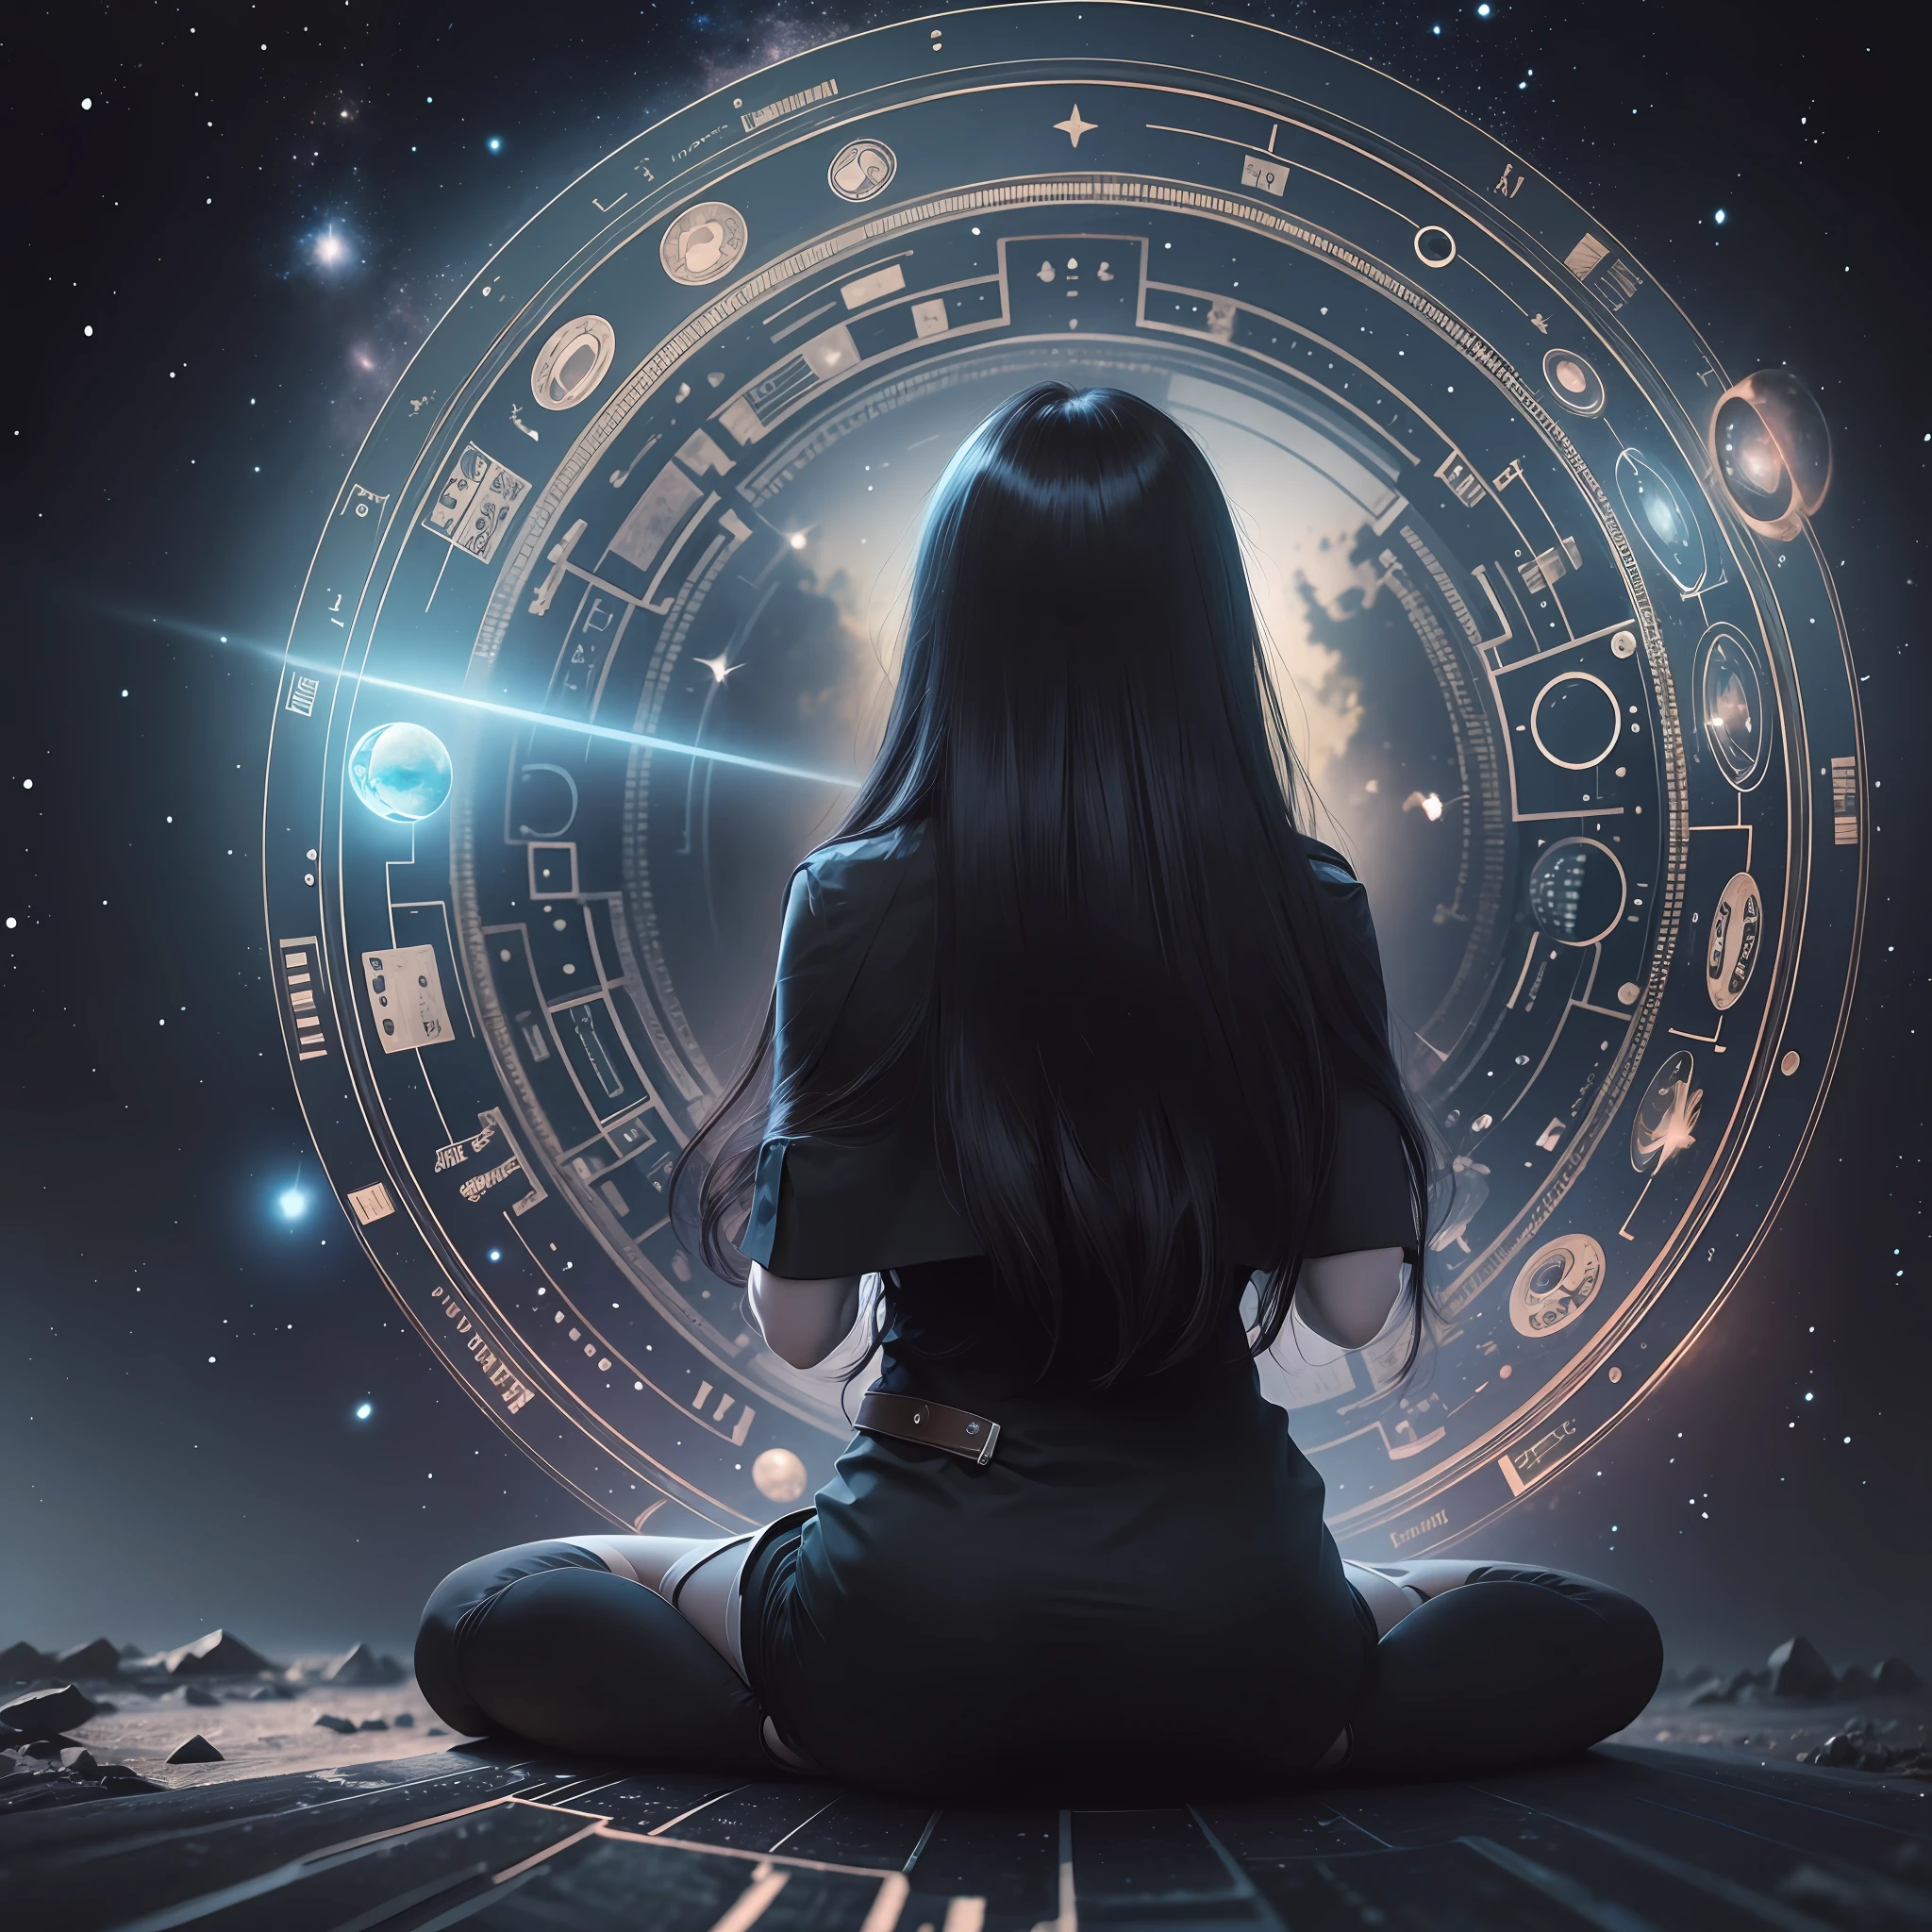 Mysterious space, dreamy landscape, fortune teller sitting, crystal ball glowing, fortune telling with tarot cards, fortune teller's face is invisible, fortune teller has black hair, cinematic, 8k, real --auto --s2